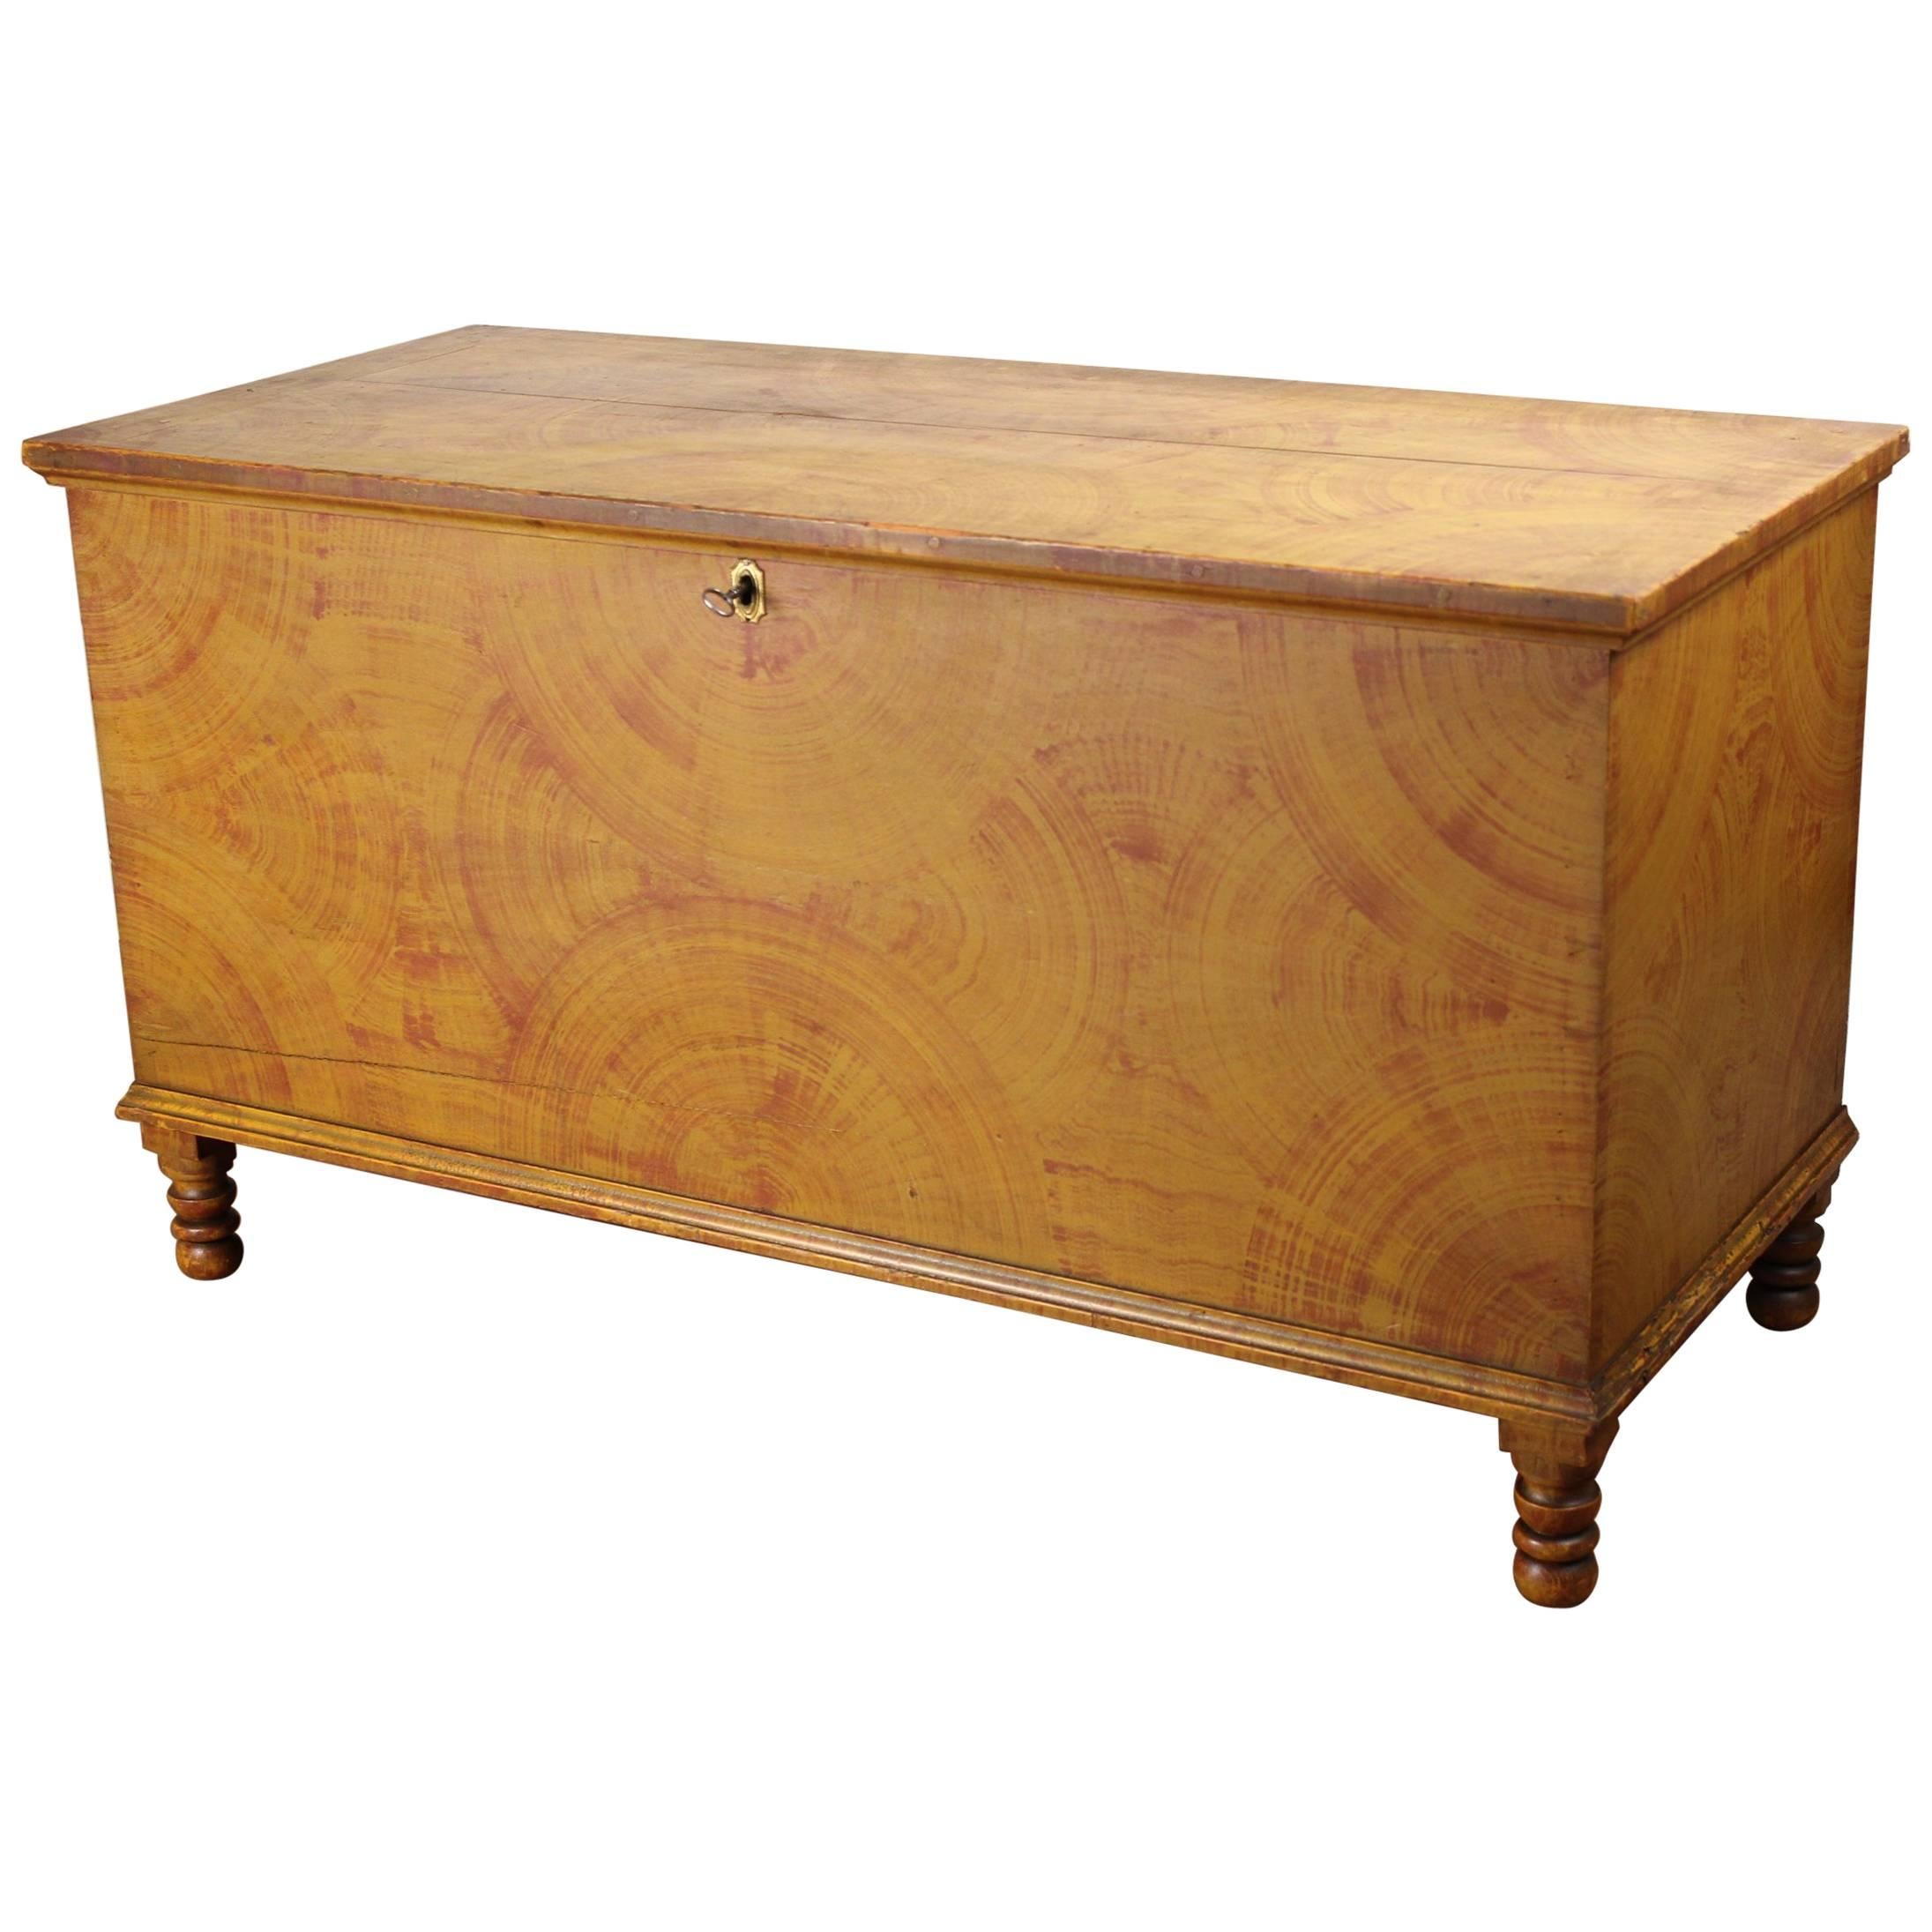 Pennsylvania Yellow-Painted and Fan-Decorated Blanket Chest